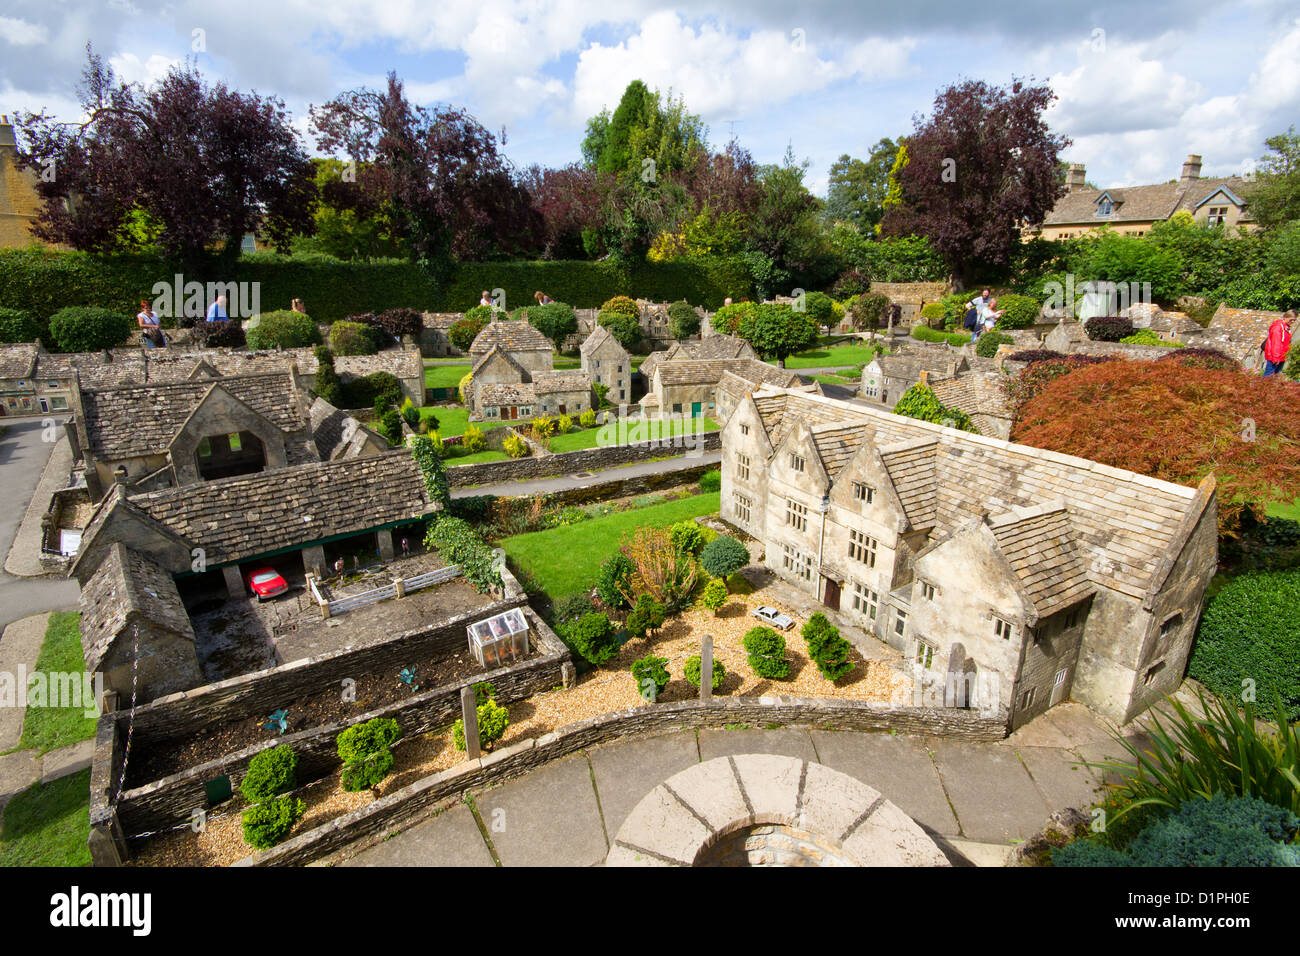 The Famous Model Village in Bourton on the Water, Gloucestershire, England. Stock Photo